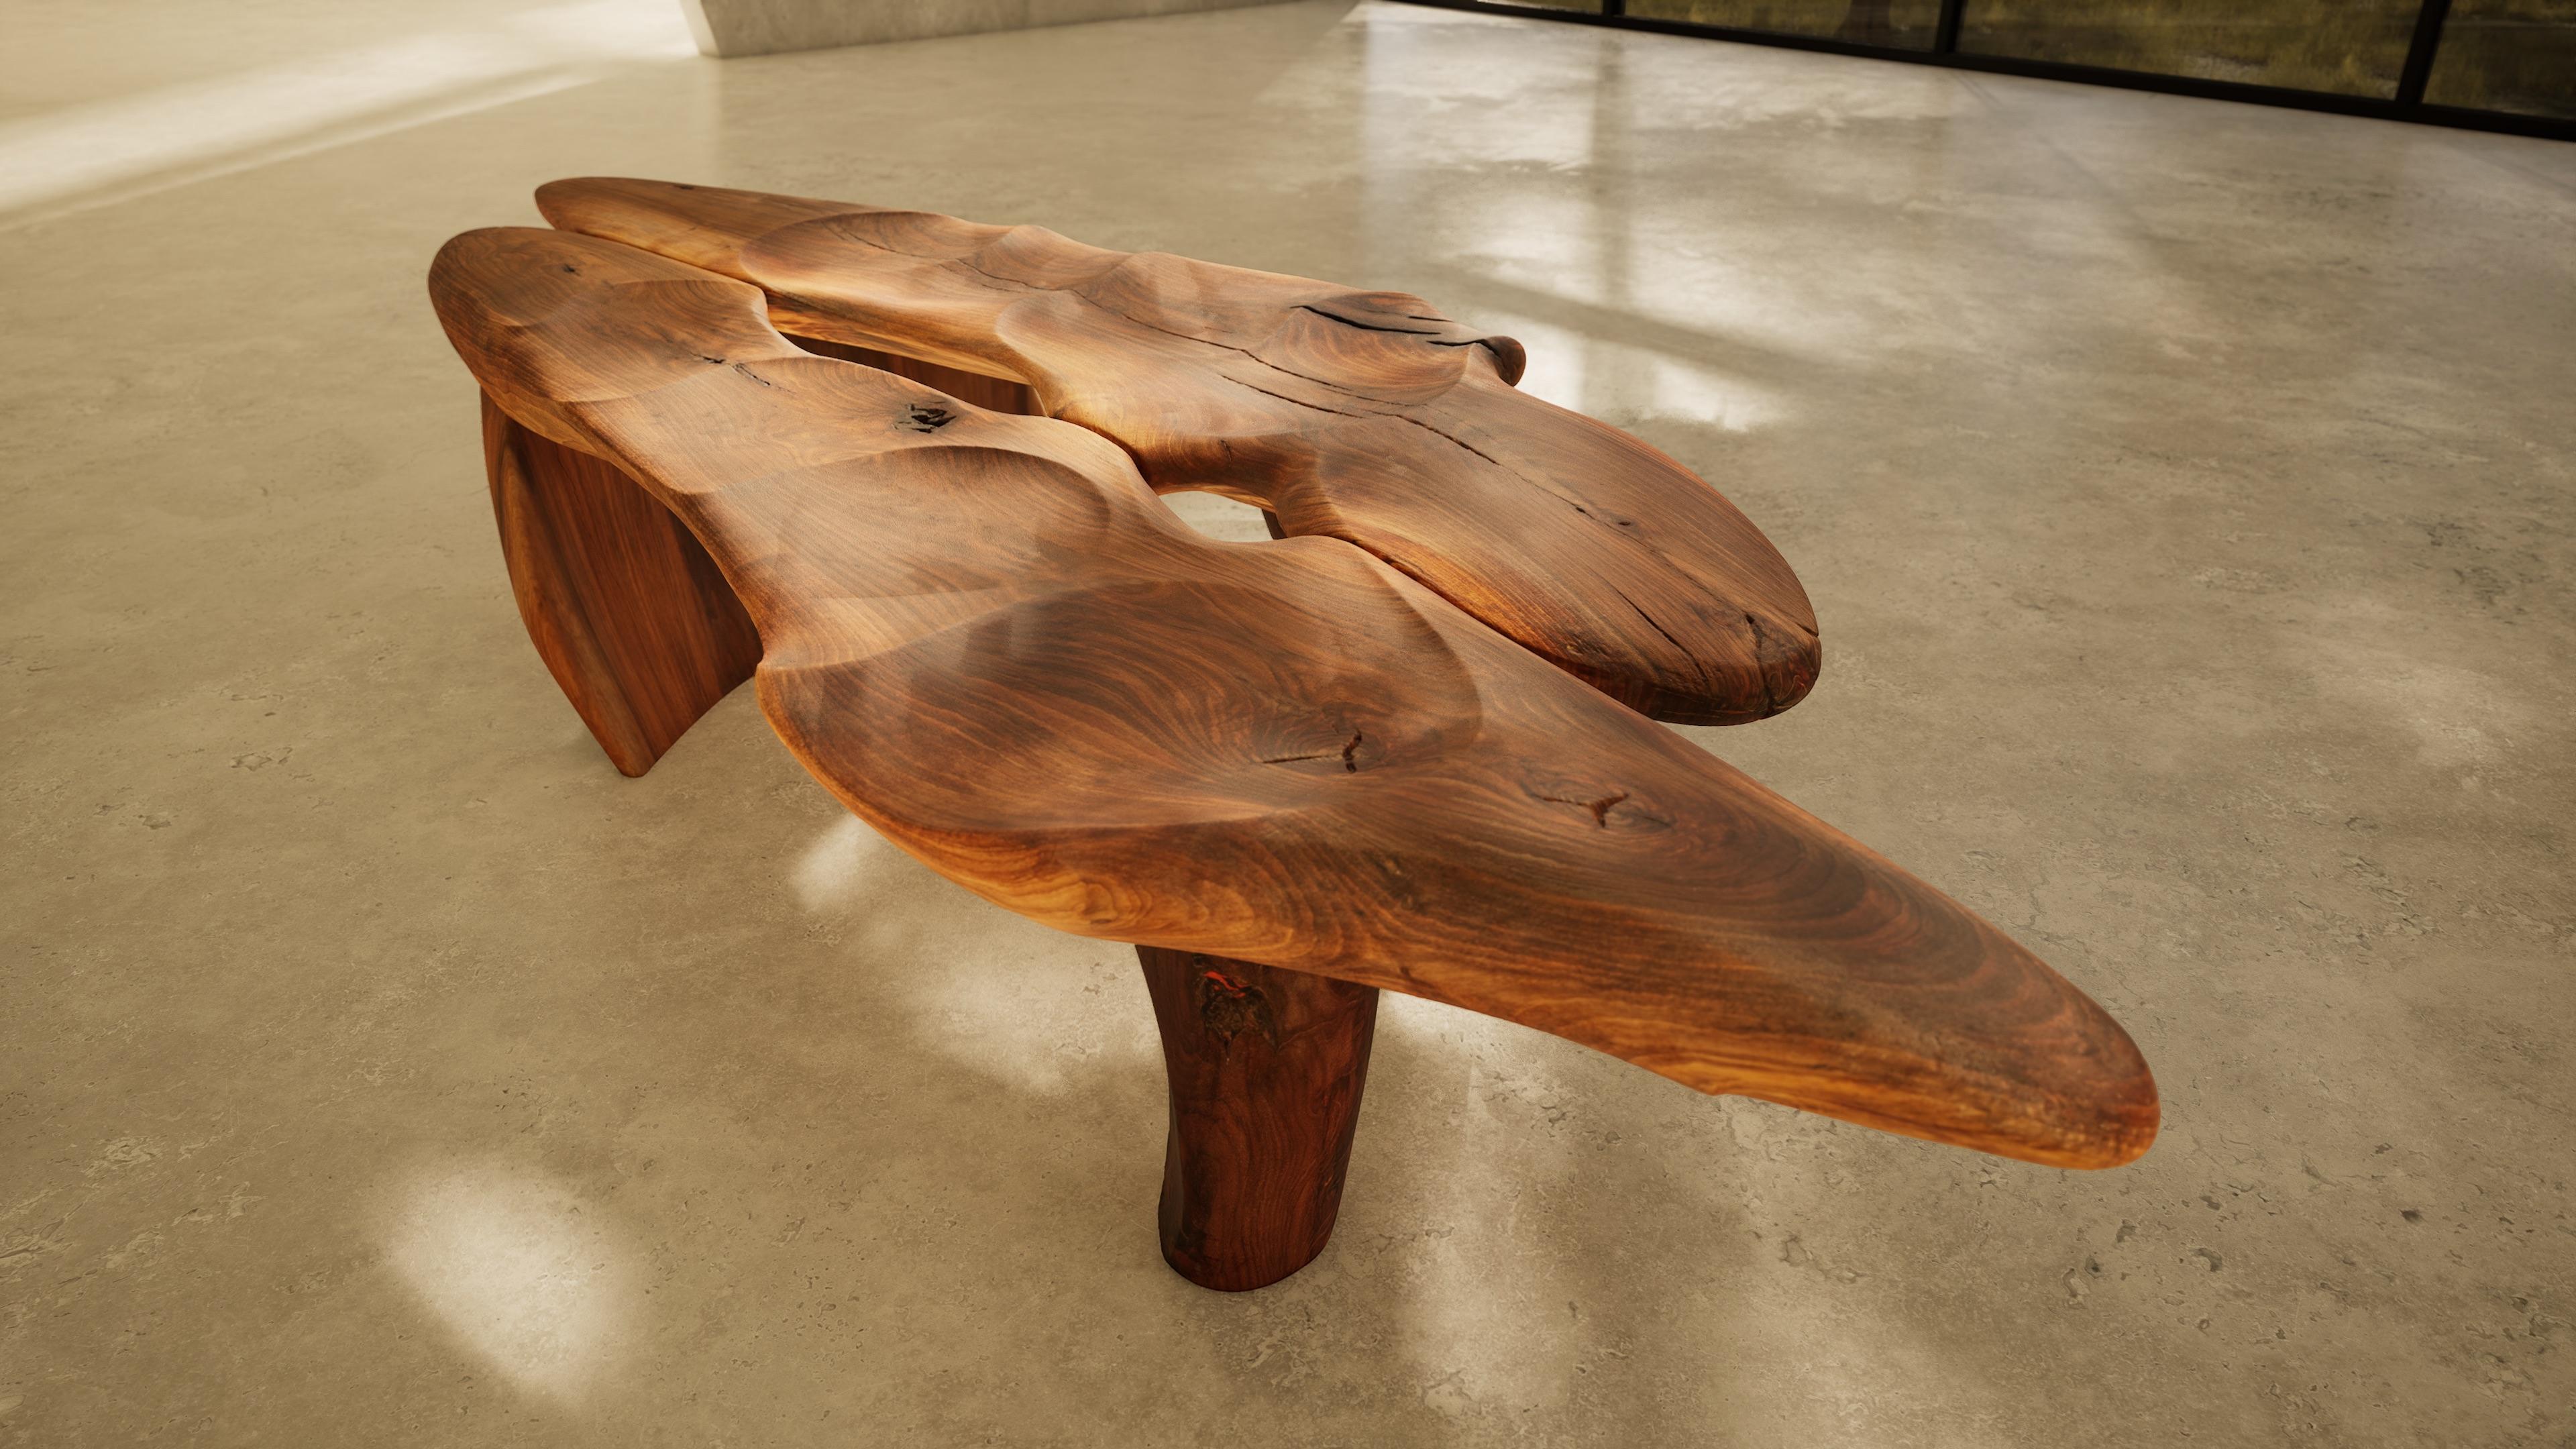 Red Cut is a central focal point sculptural bench seat carved from walnut wood.
There are many layers within the process of creation of the Red Cut bench and the origin of its conception and design.
There is within the centre of the piece a rift and